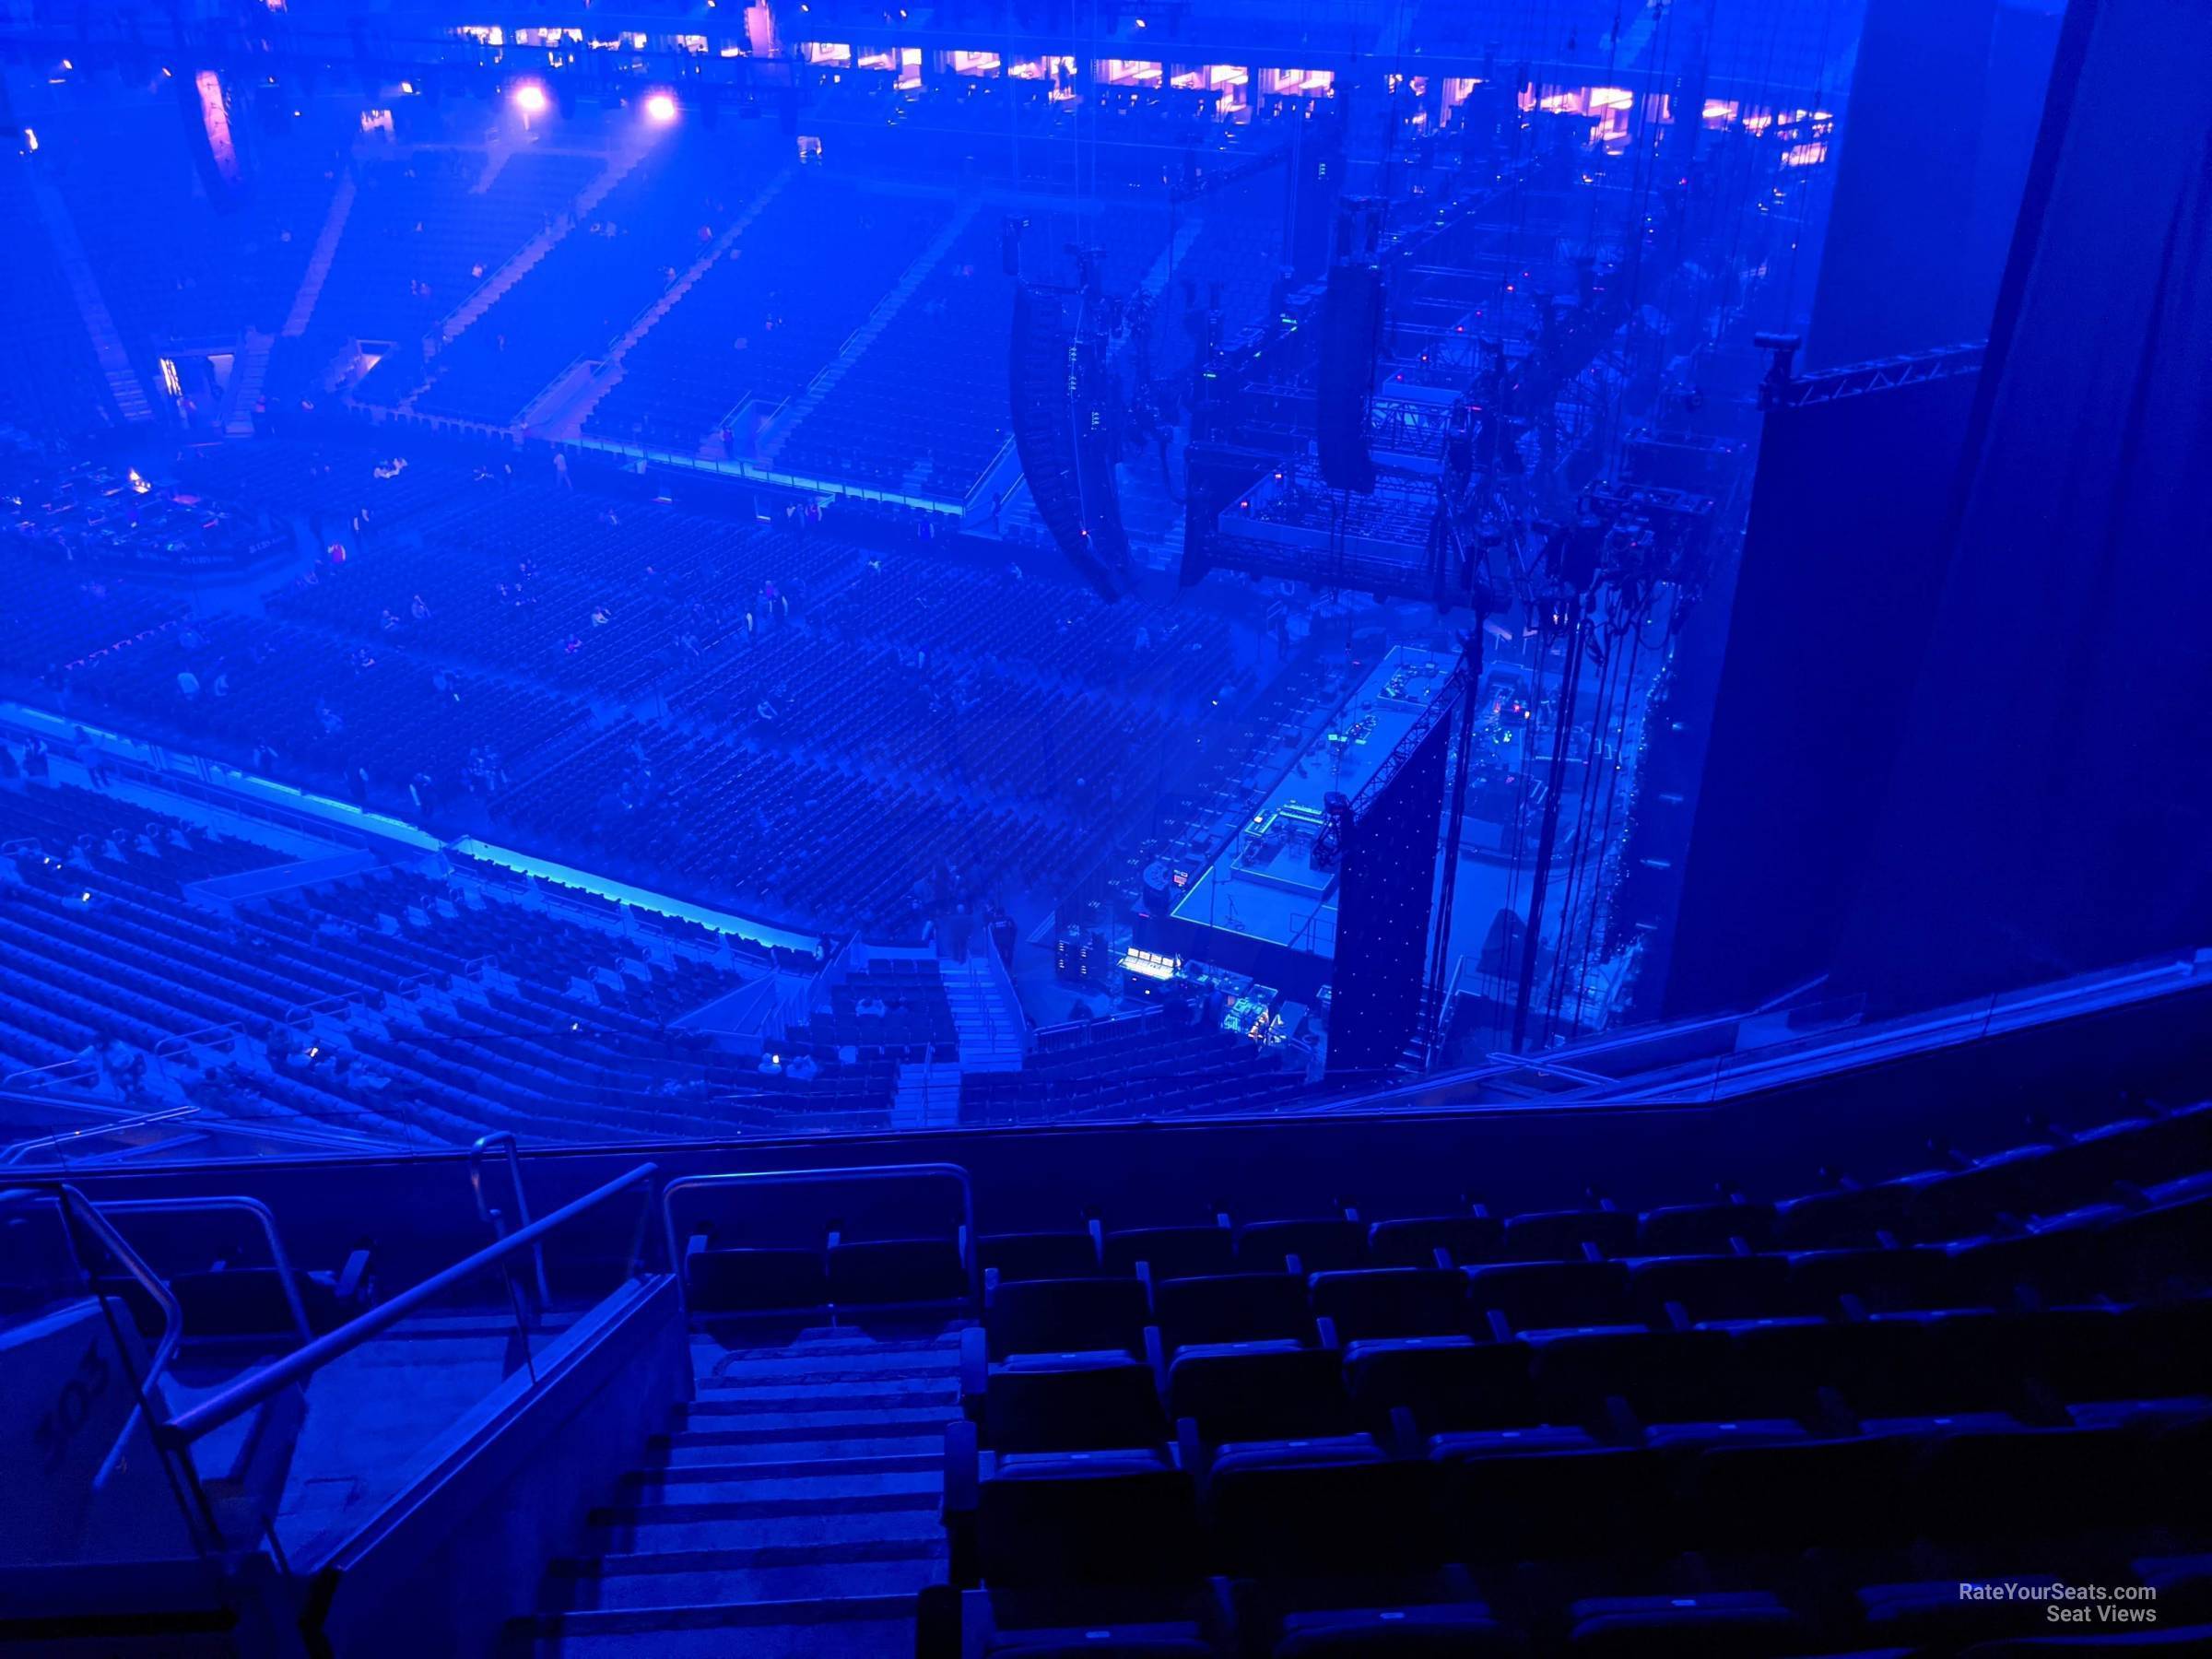 section 302, row 8 seat view  for concert - ubs arena